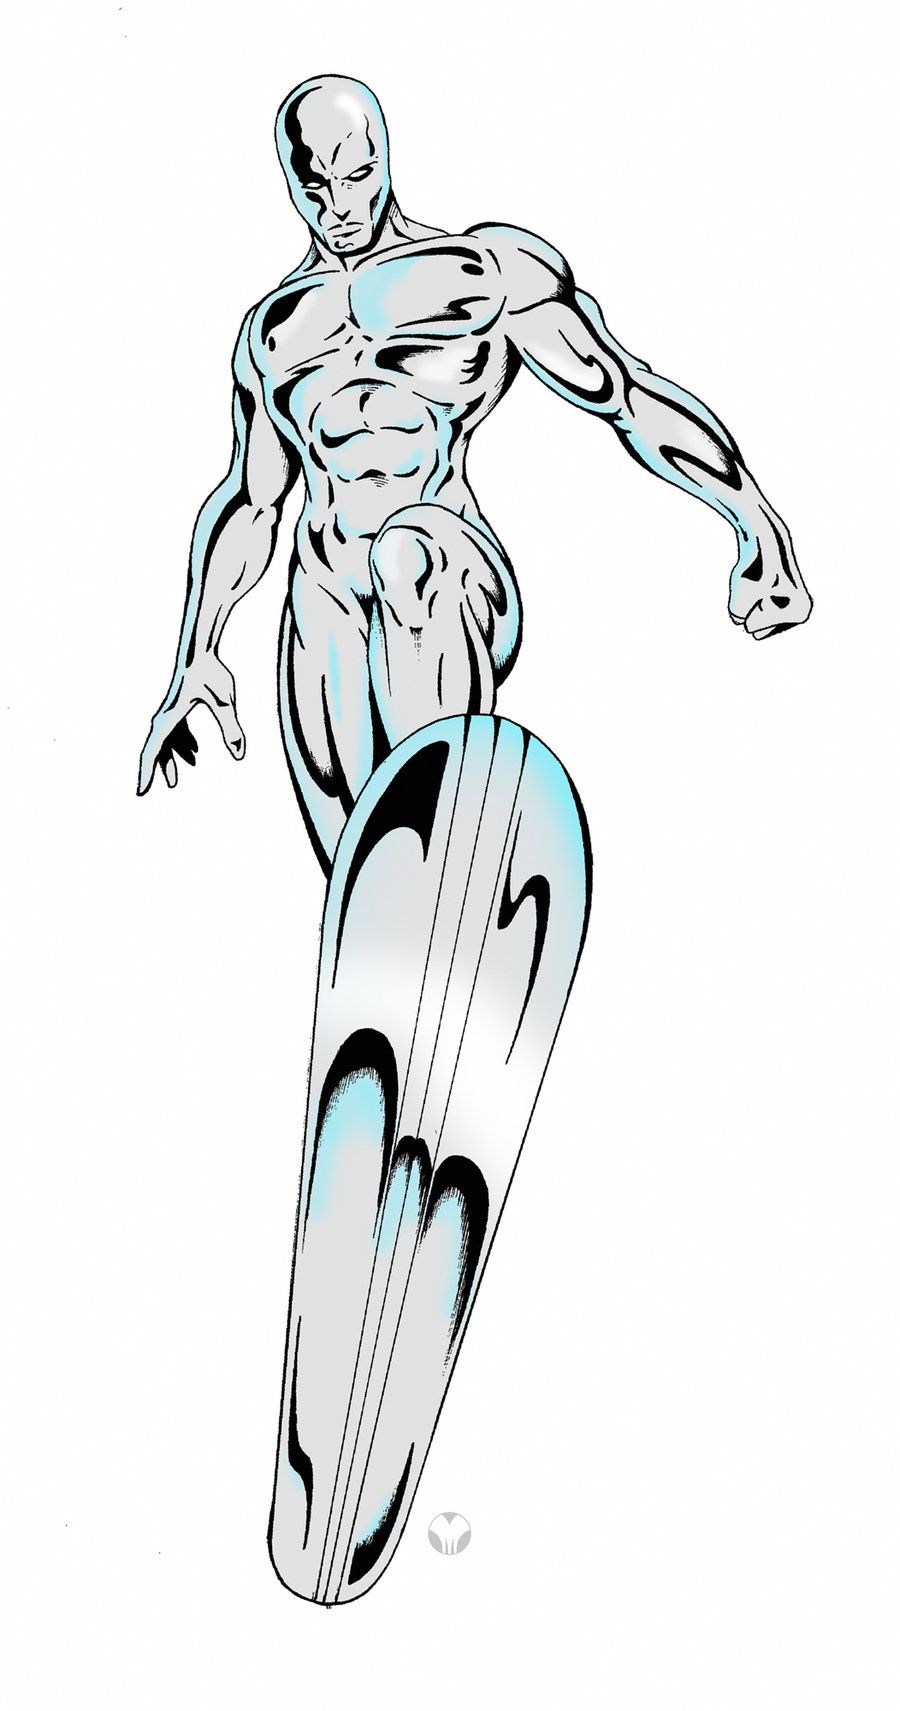 Silver Surfer Drawing | Free download on ClipArtMag